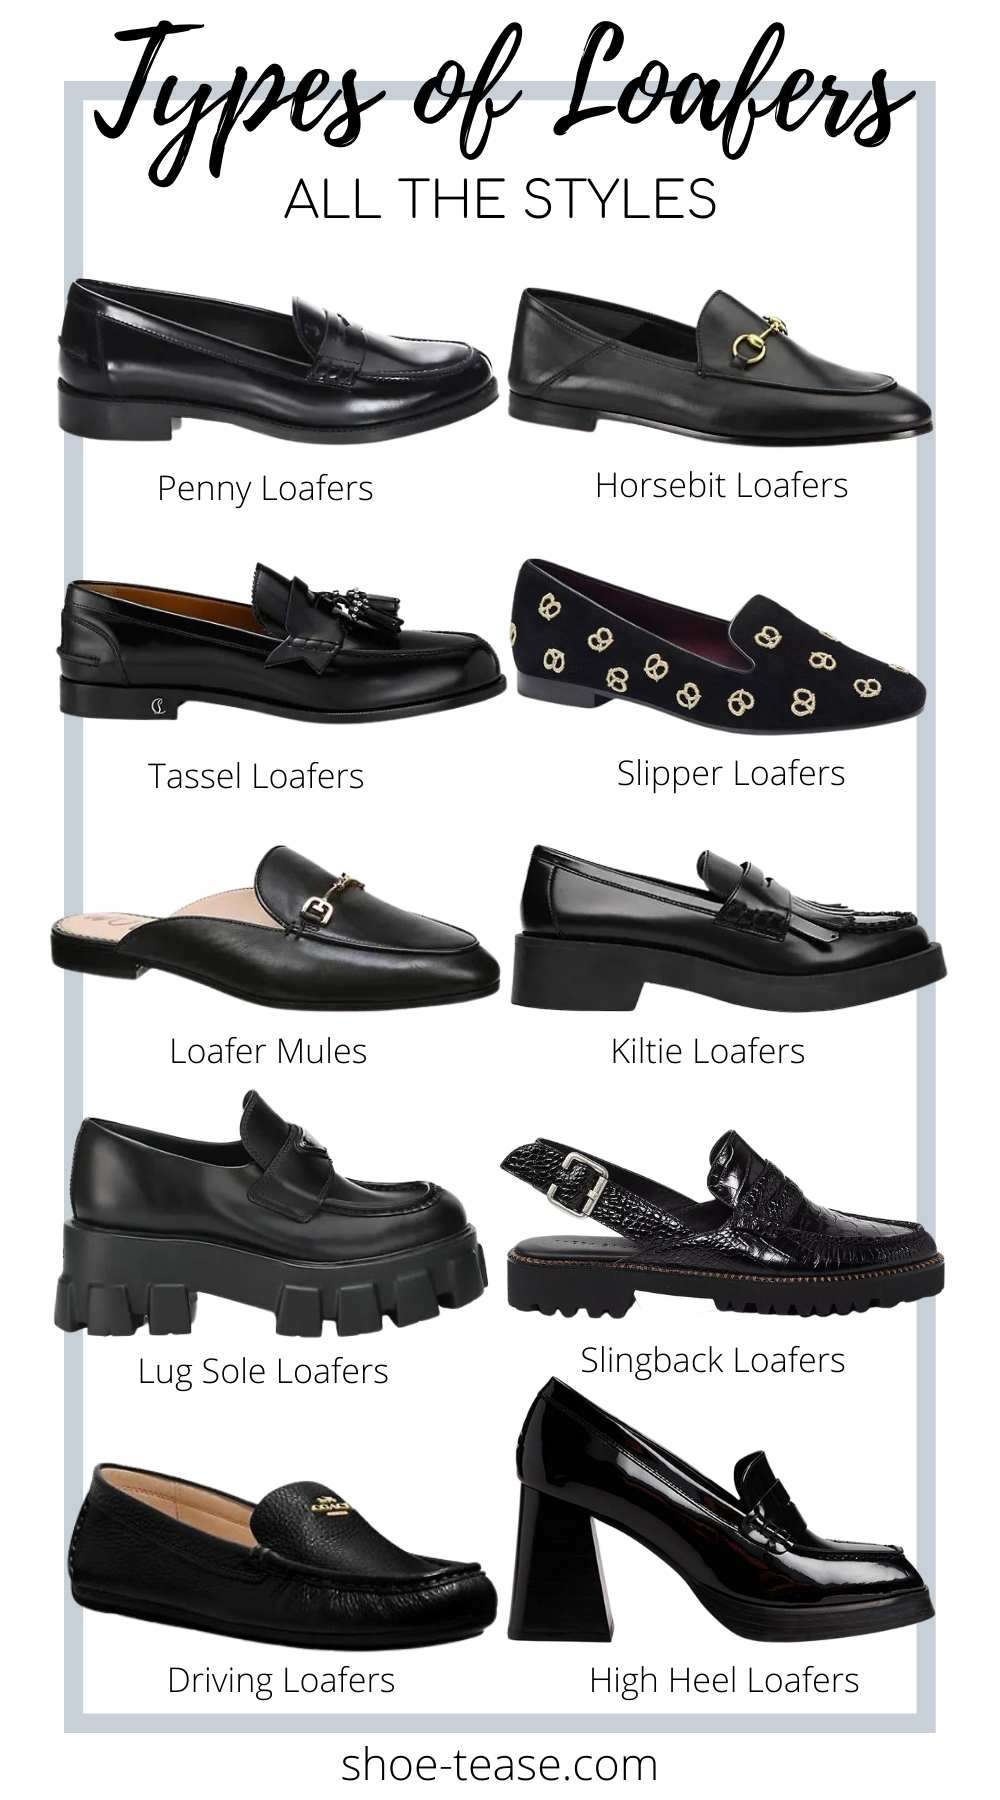 Black text types of loafers all the styles over collage of 10 different loafer types with names.